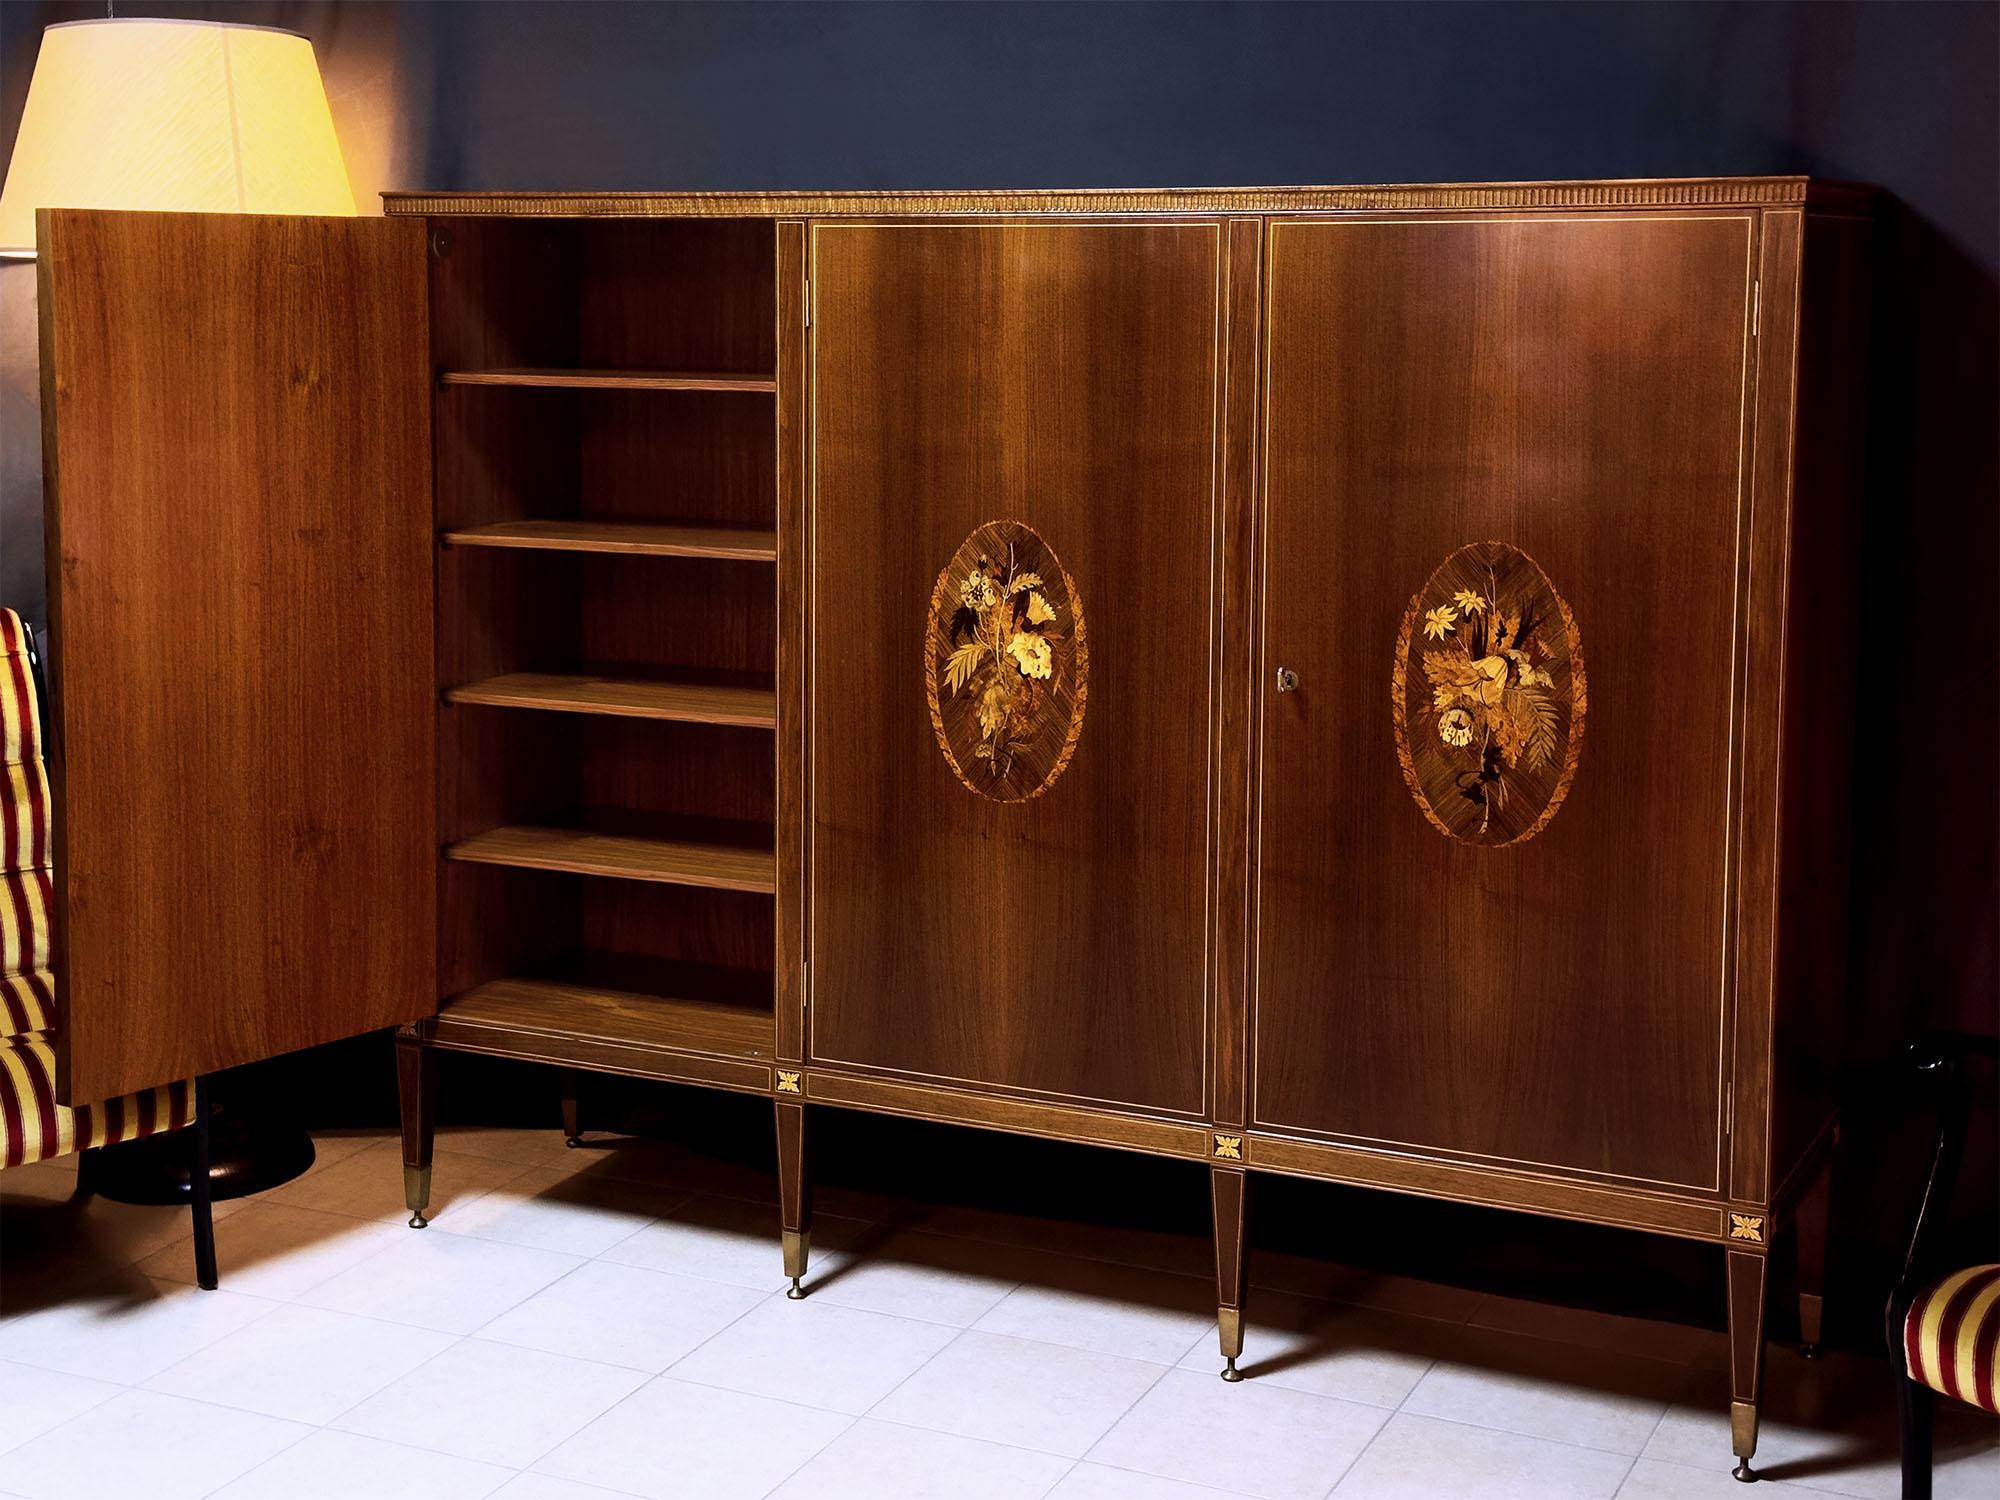 Italian Mid-Century Sideboard with Inlays by Anzani for Marelli & Colico, 1950s For Sale 3